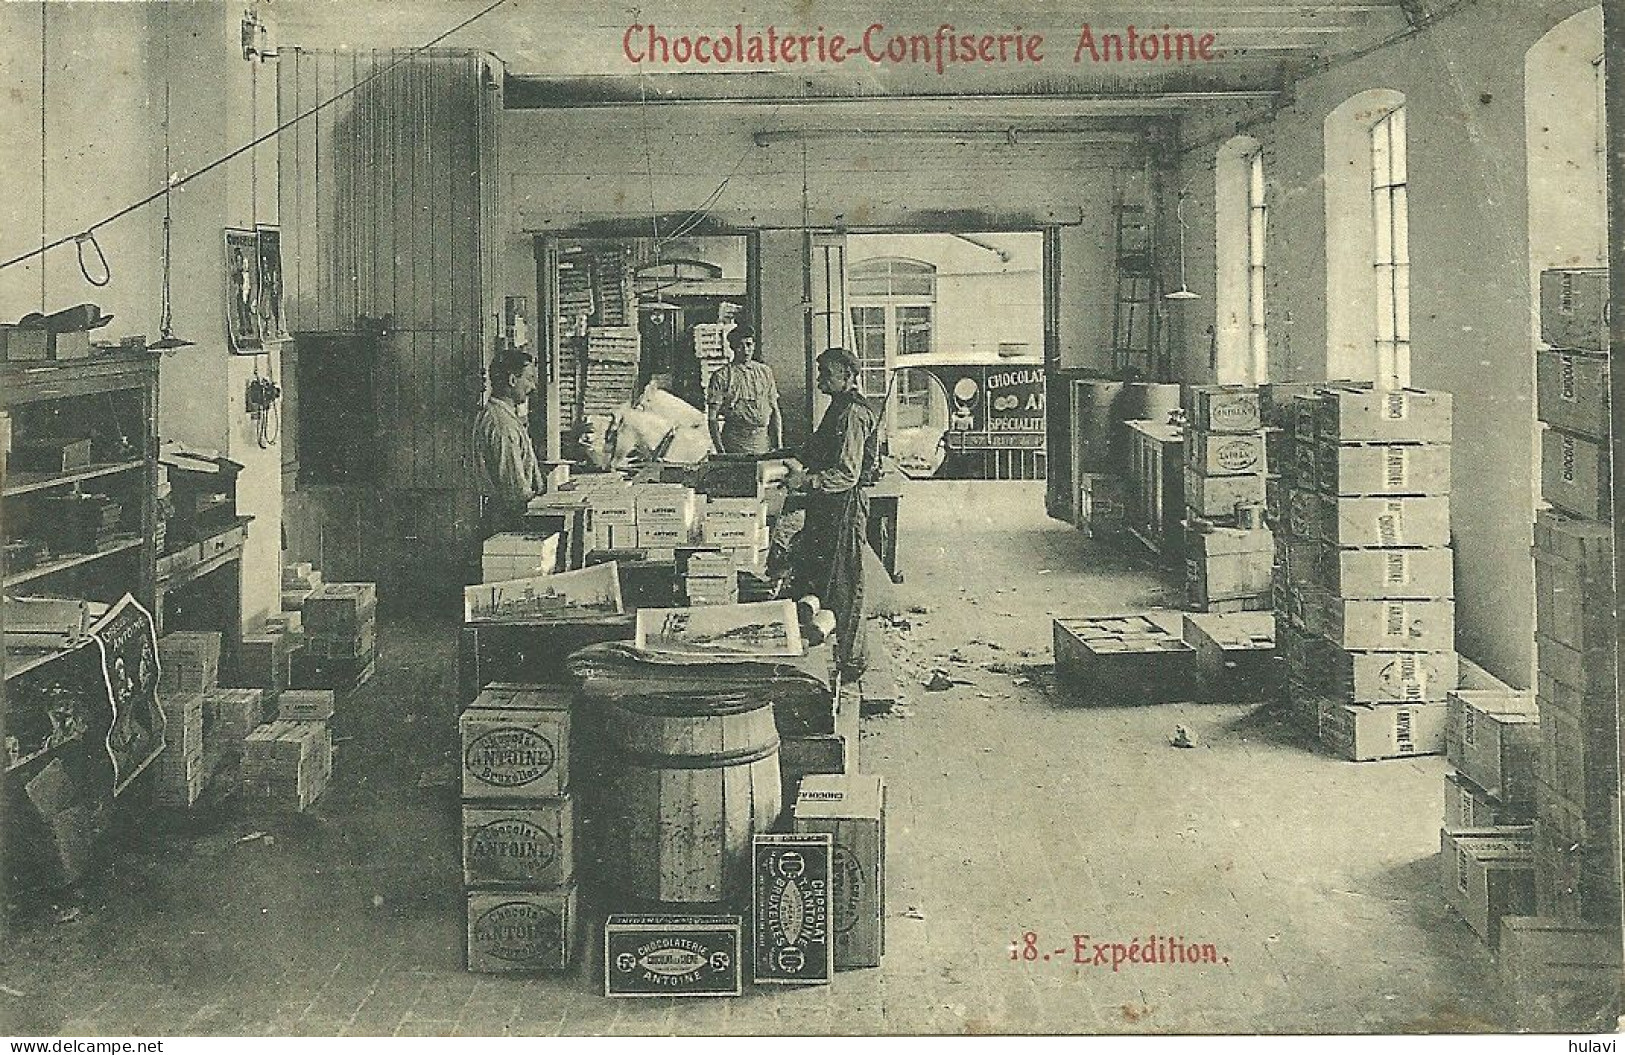 CHOCOLATERIE-CONFISERIE ANTOINE - EXPEDITION (pliure) (ref 442) - Old Professions